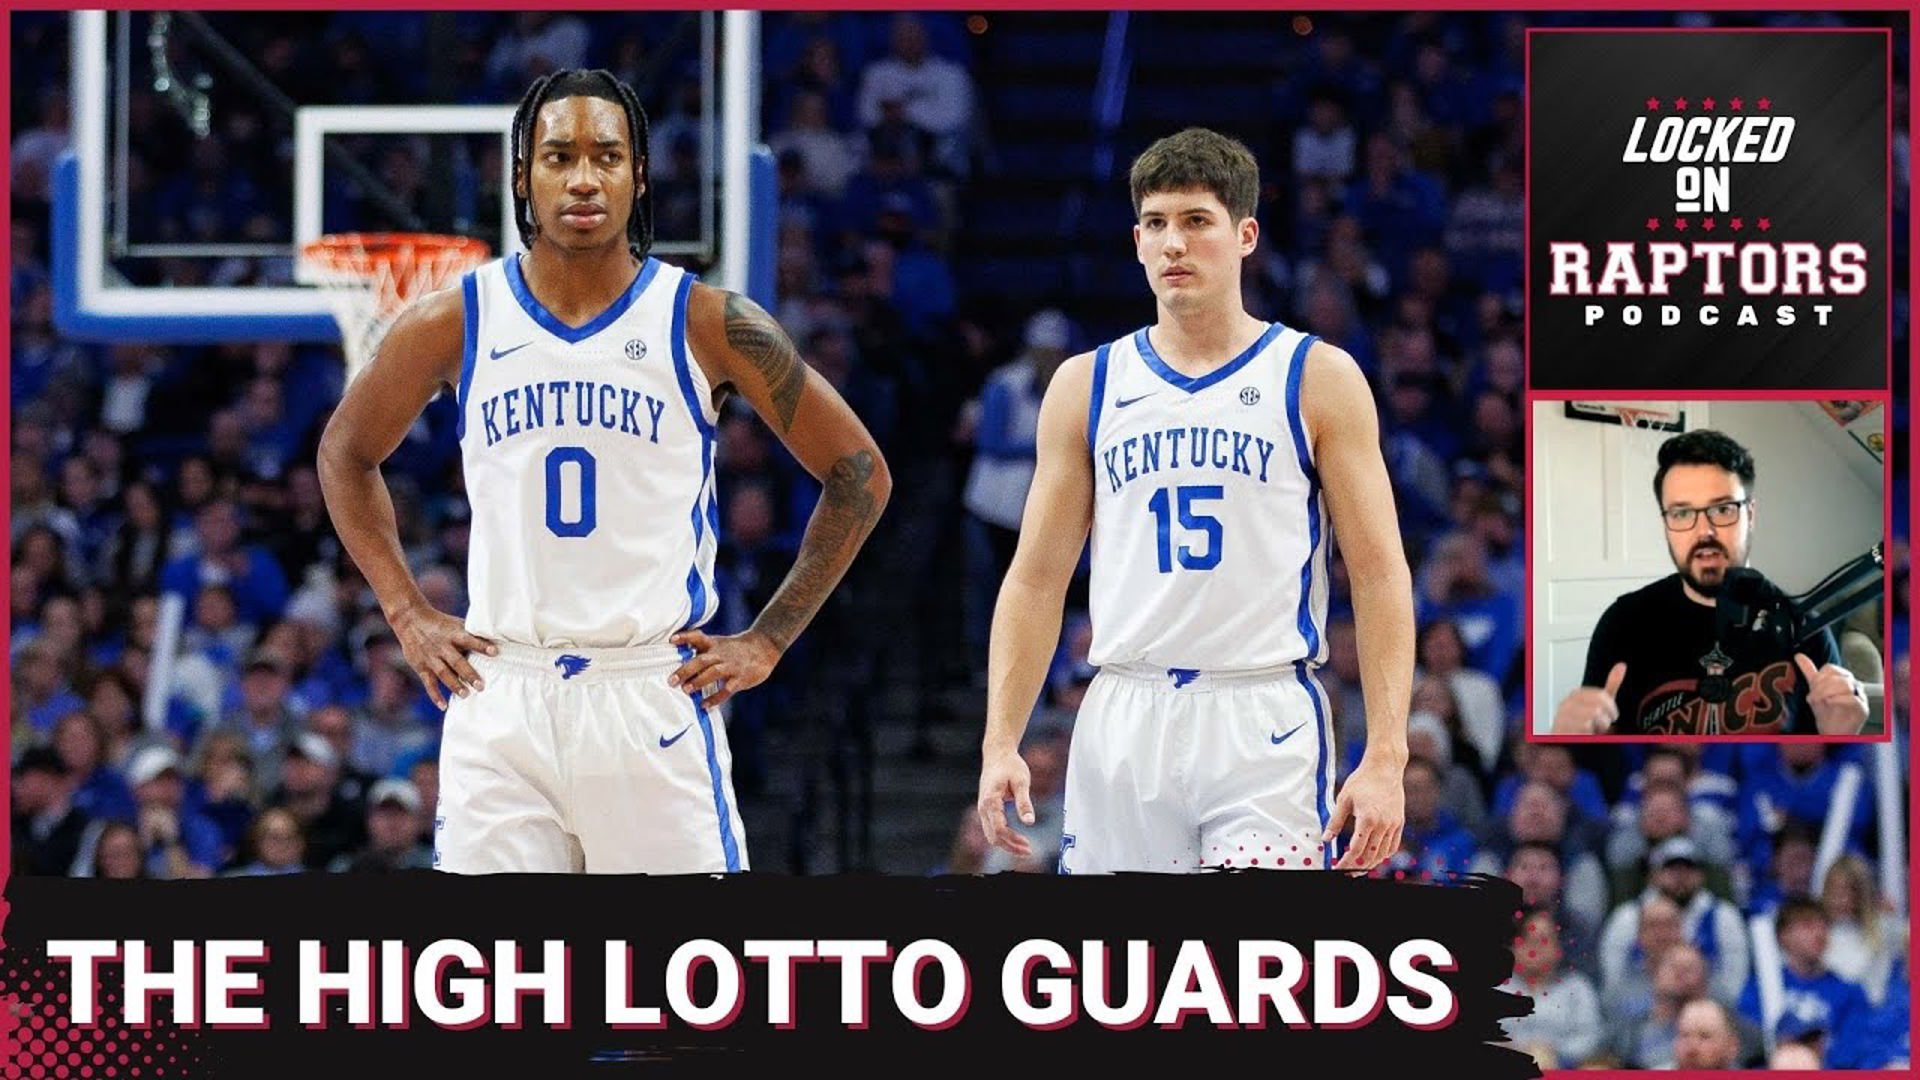 In Episode 1627, Sean Woodley goes solo to continue his look at some of the prospects to watch for Toronto Raptors heading into the NBA Draft Lottery